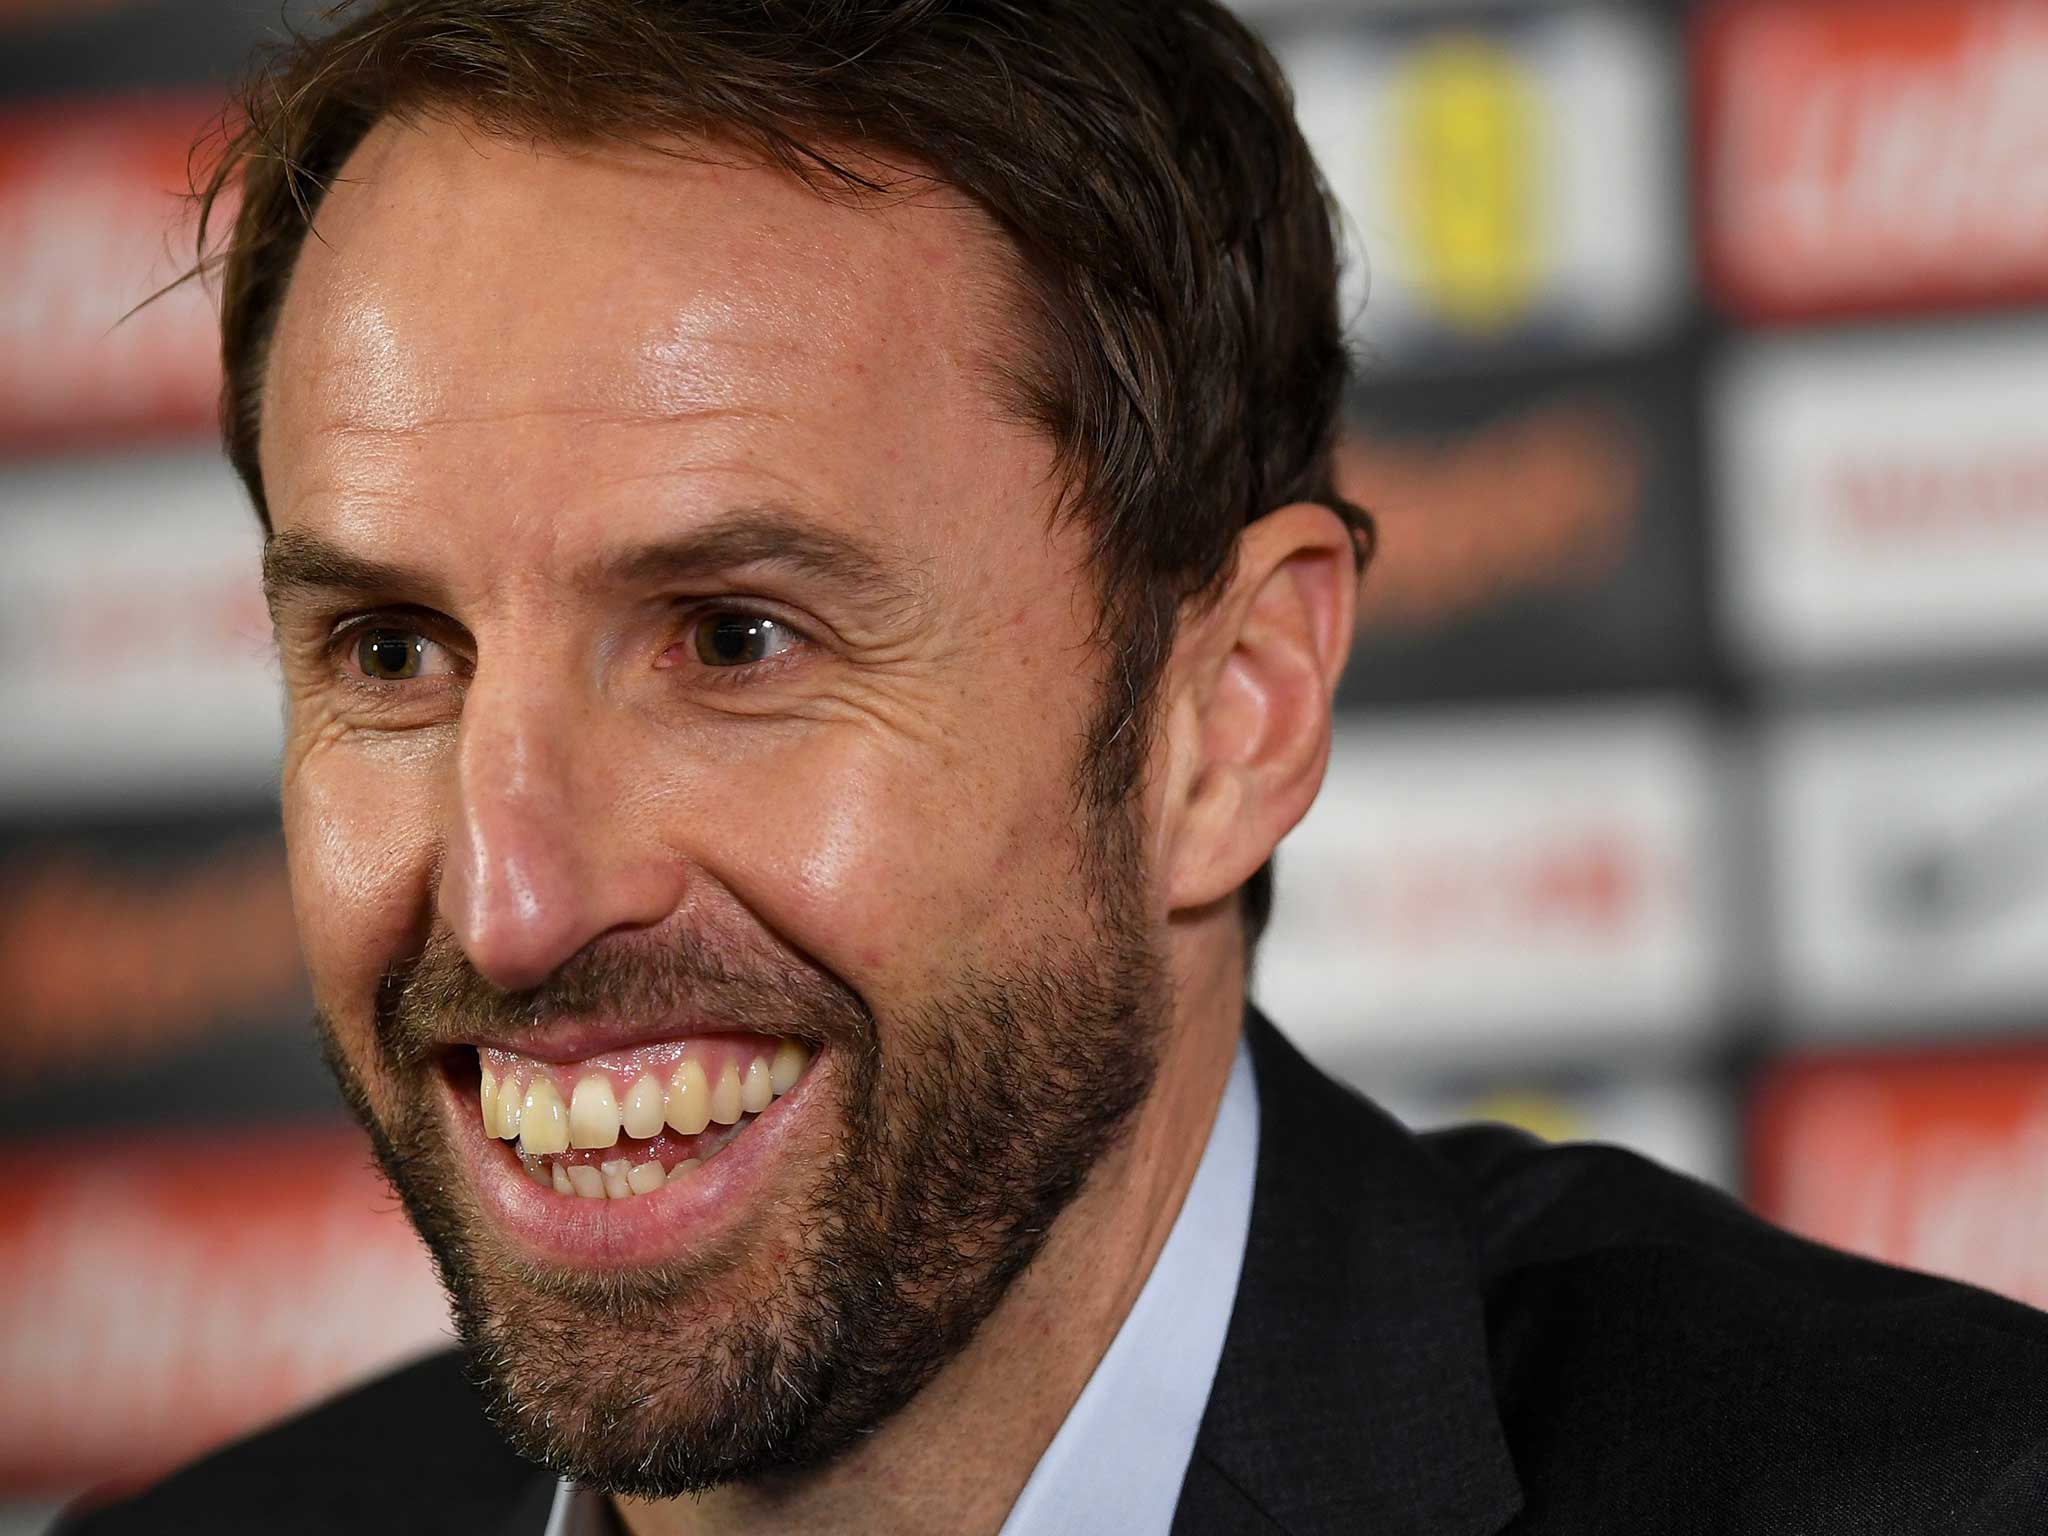 Gareth Southgate speaks to the media for the first time as England caretaker manager